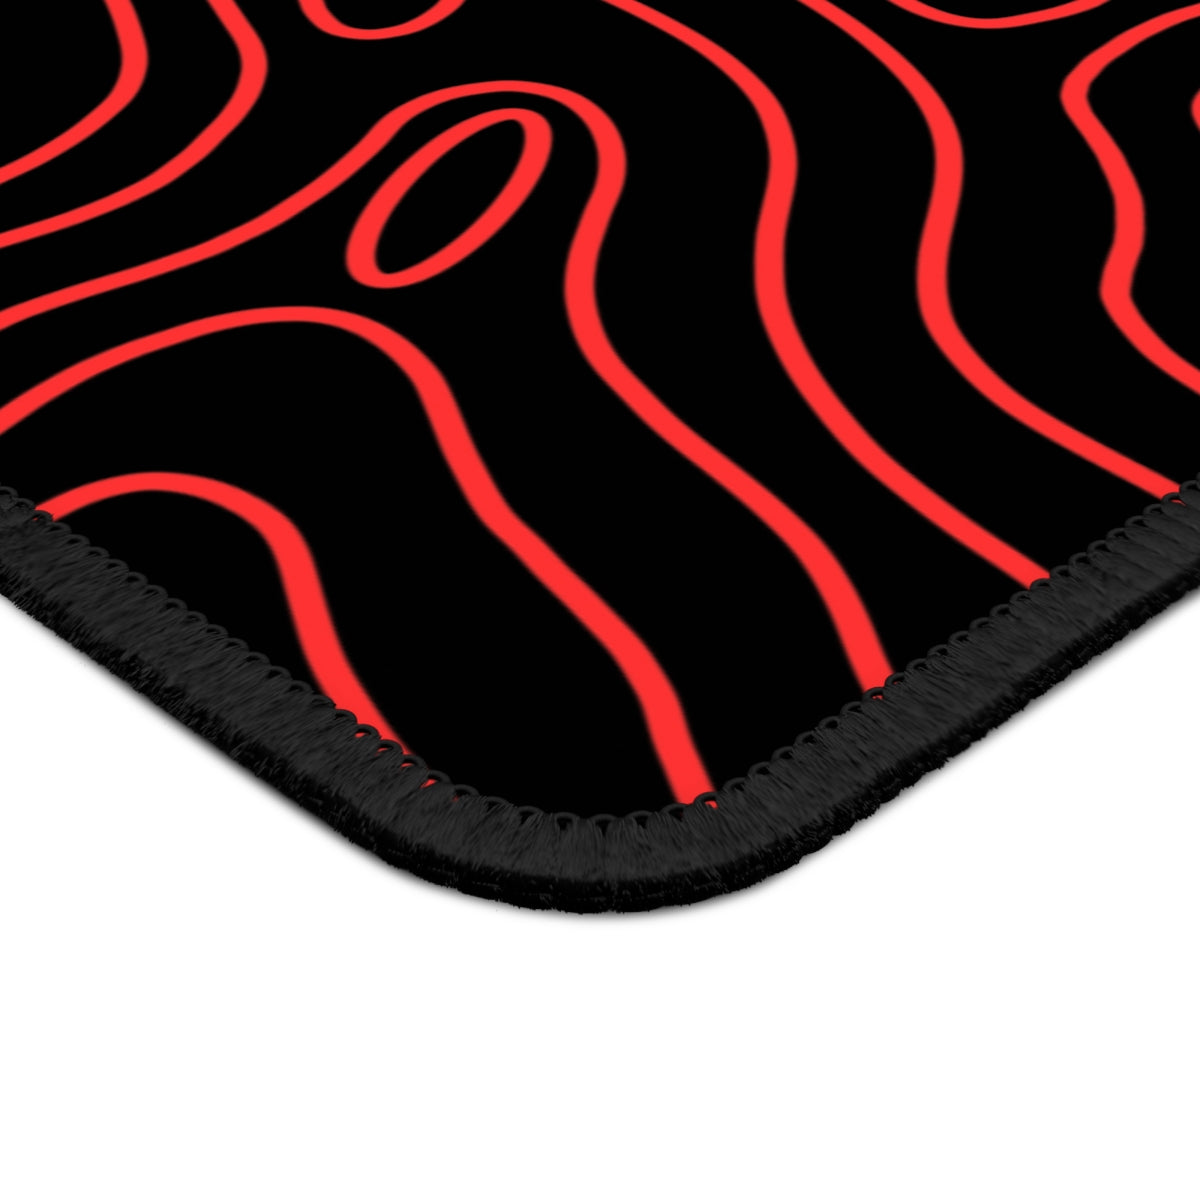 Black & Red Topographic Gaming Mouse Pad - Desk Cookies